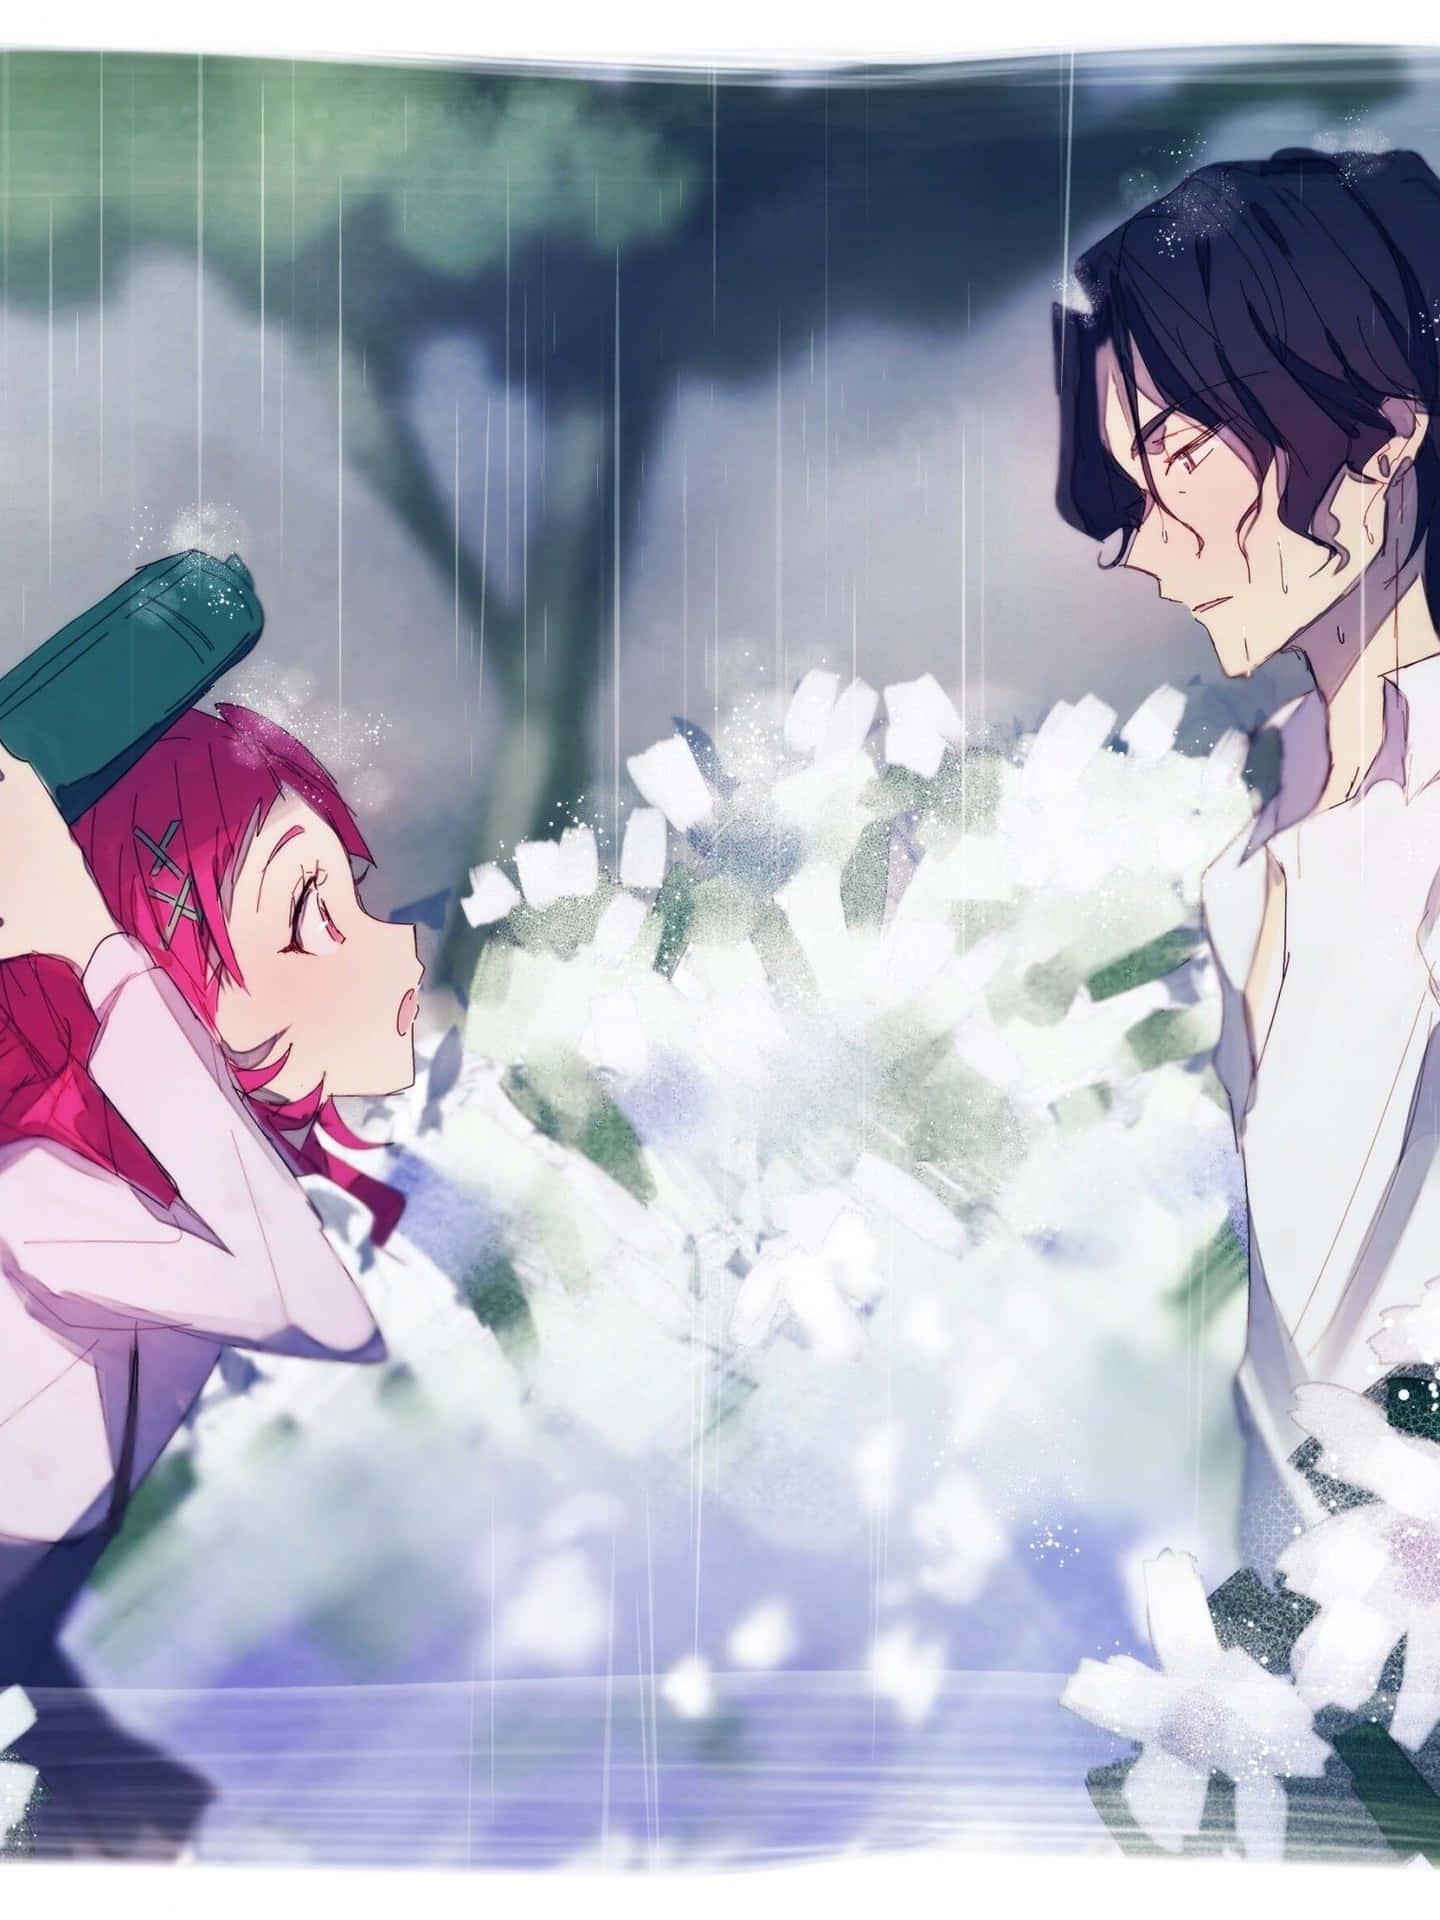 “Two lovers embrace in the rain, feeling the beauty of the moment.”